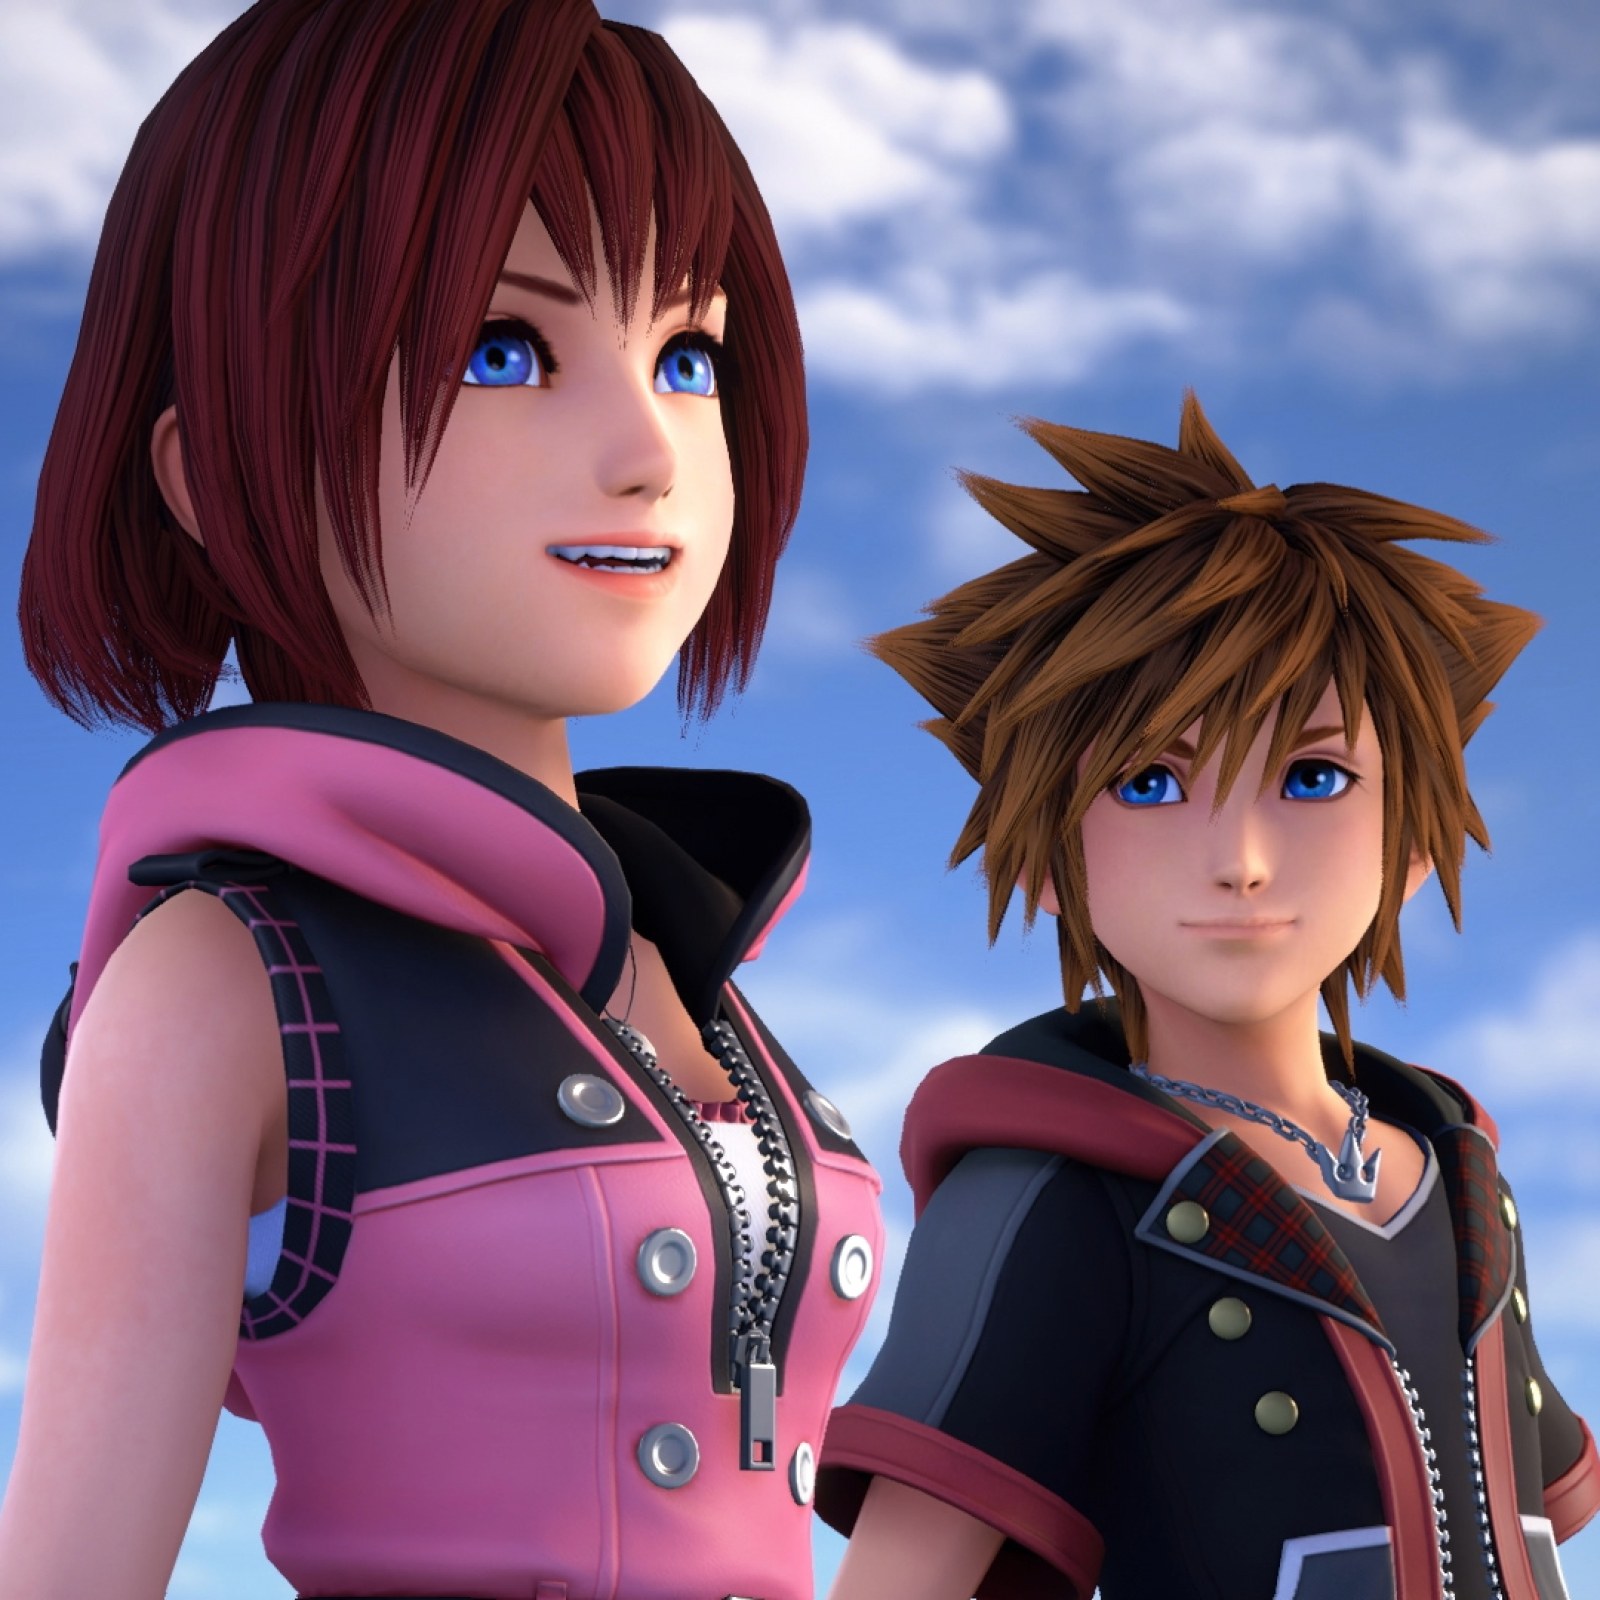 Kingdom Hearts 3 Remind' DLC Release Time: When Can I Download on PS4?